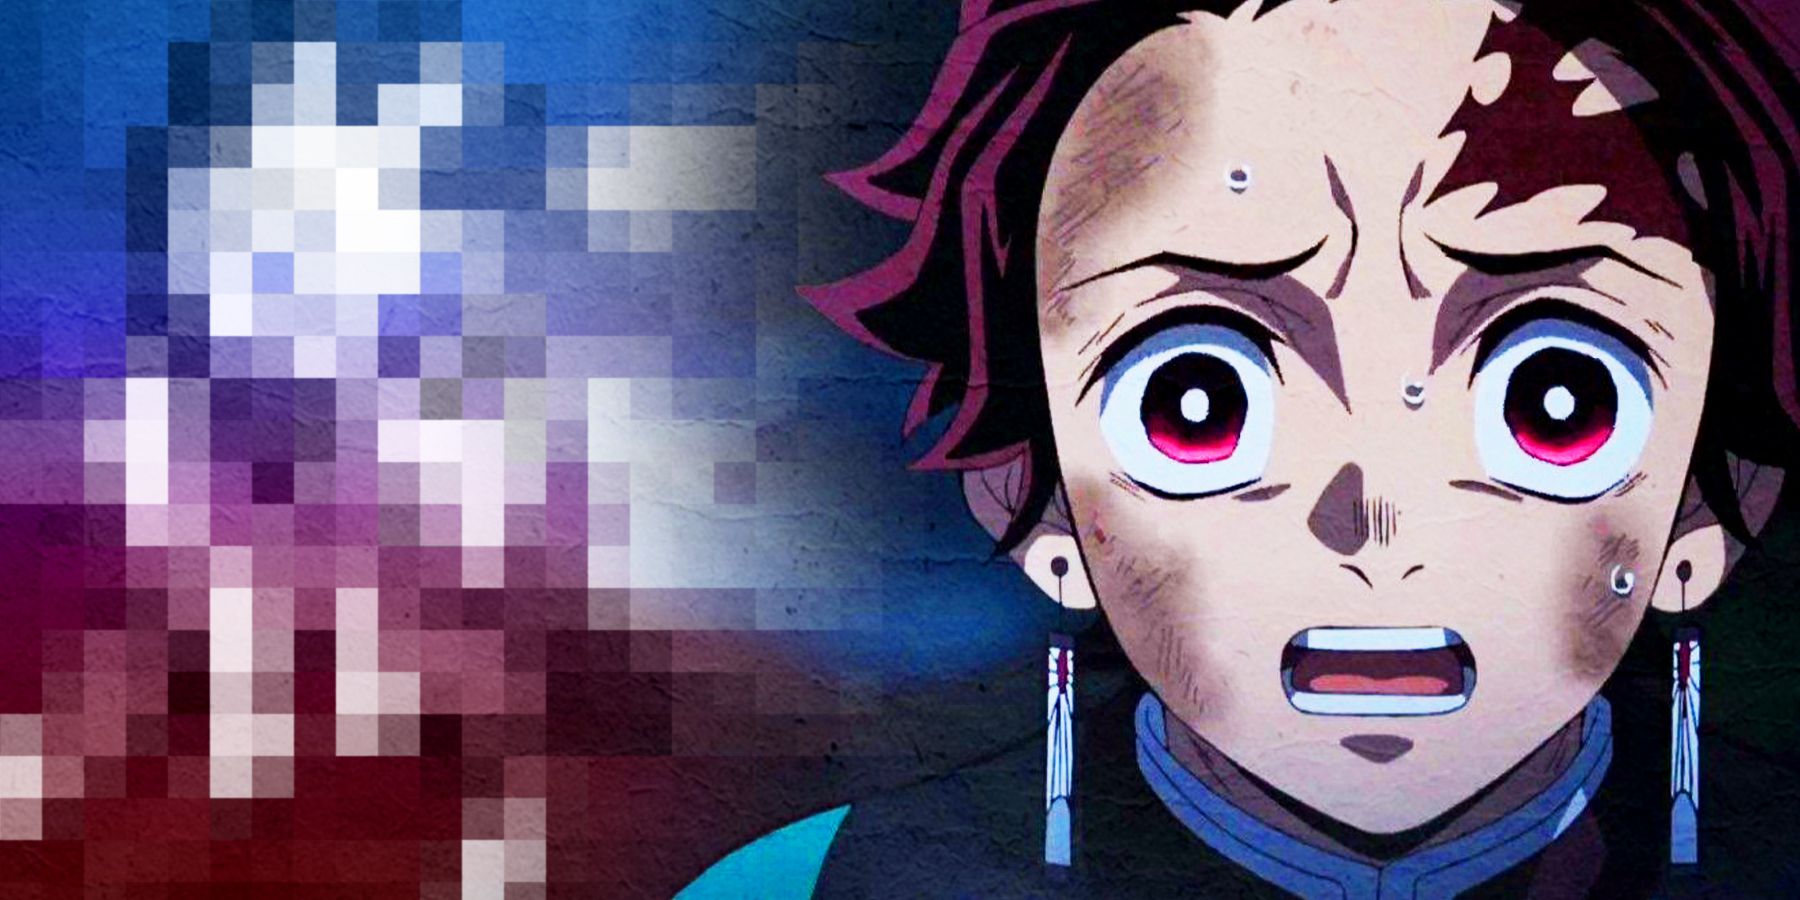 Tanjiro of Demon Slayer looking shocked in front of a mysteriously pixelated image